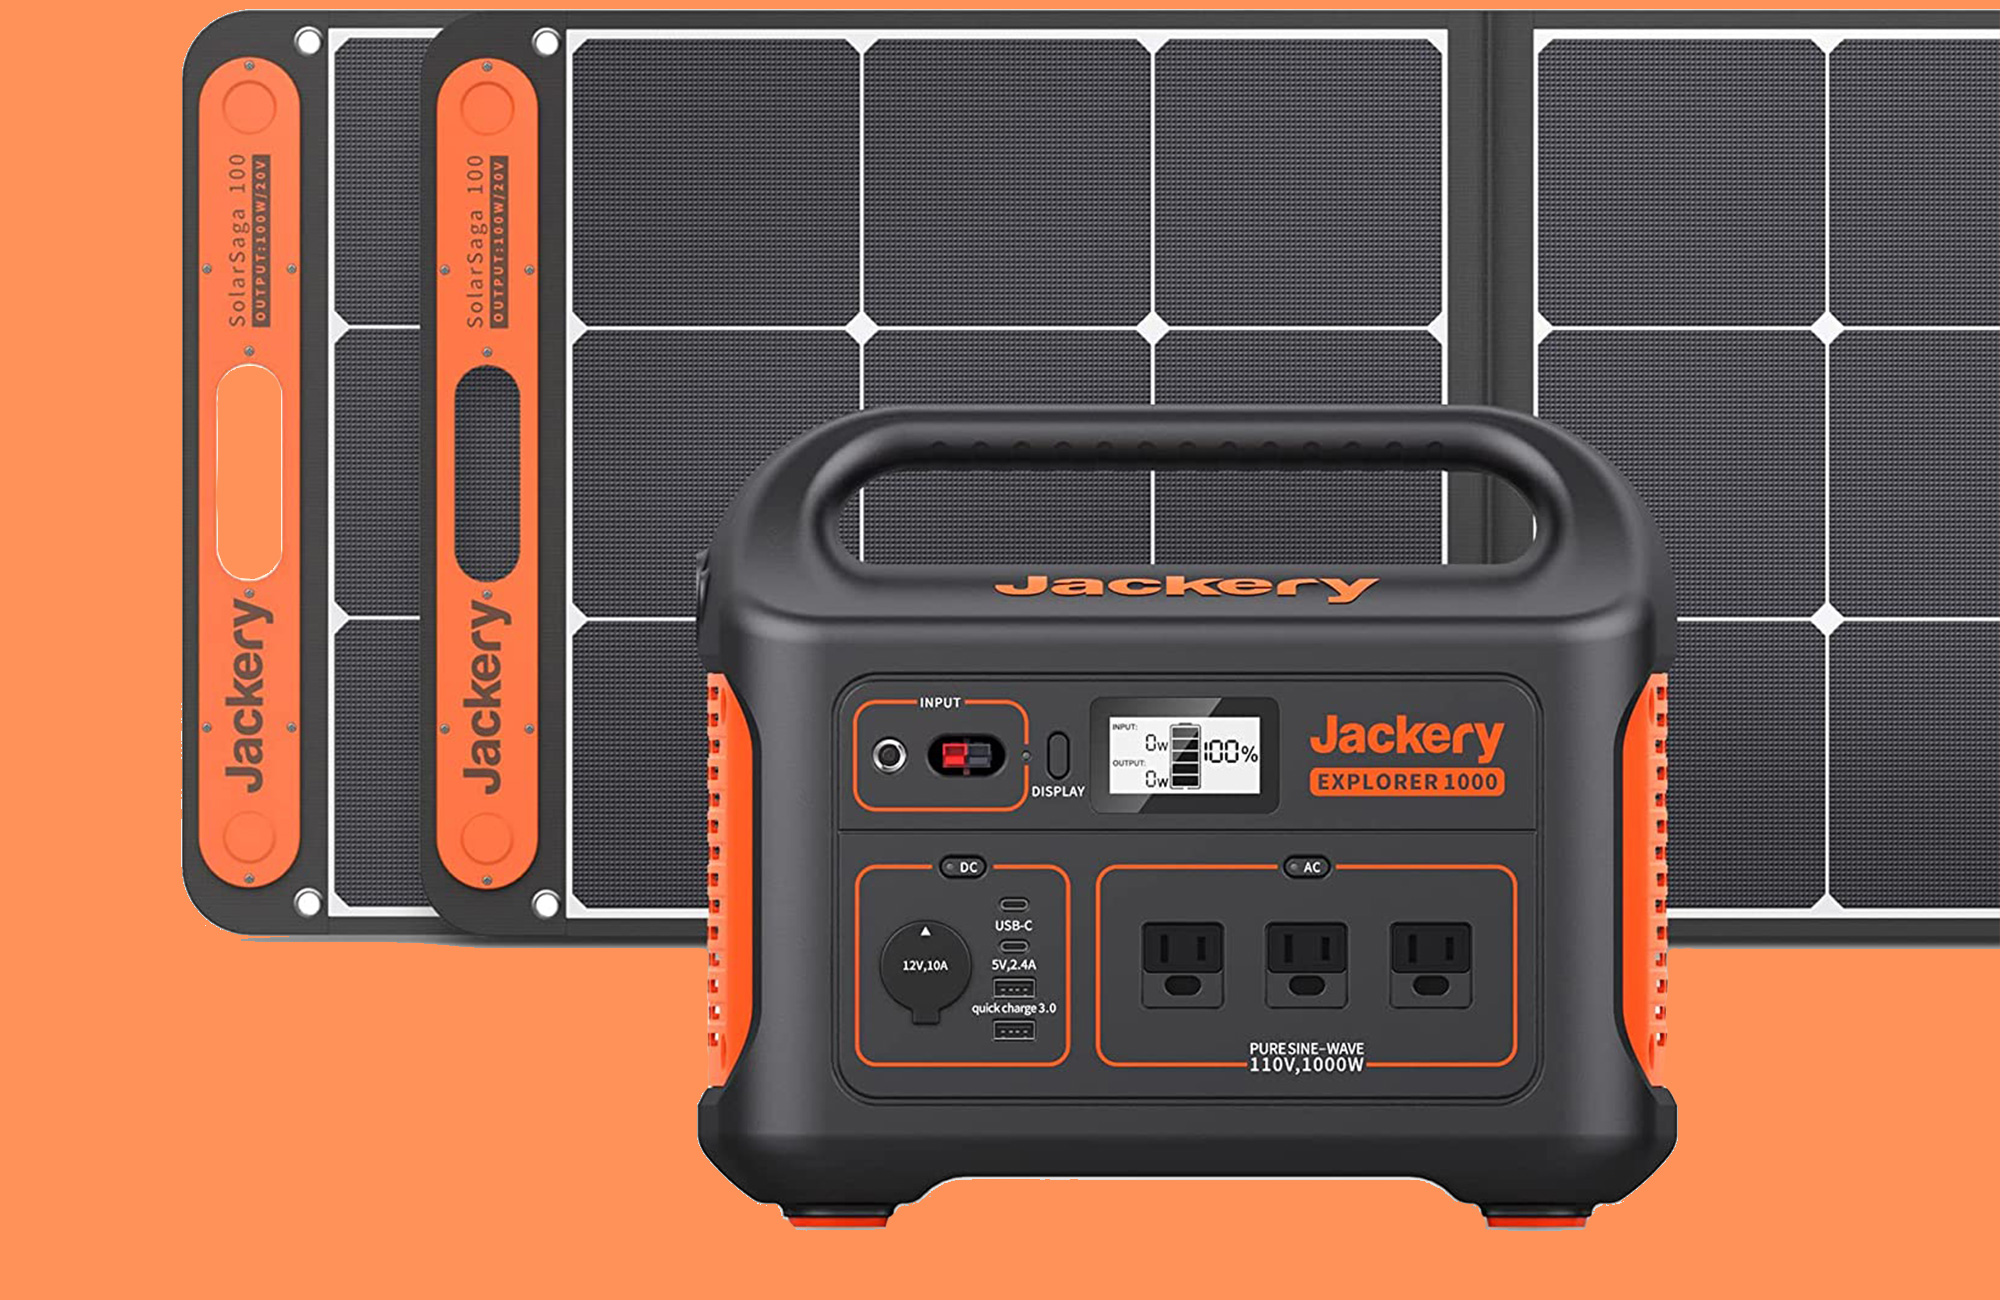 Jackery Solar Generators are on sale right now on Amazon for Prime Day